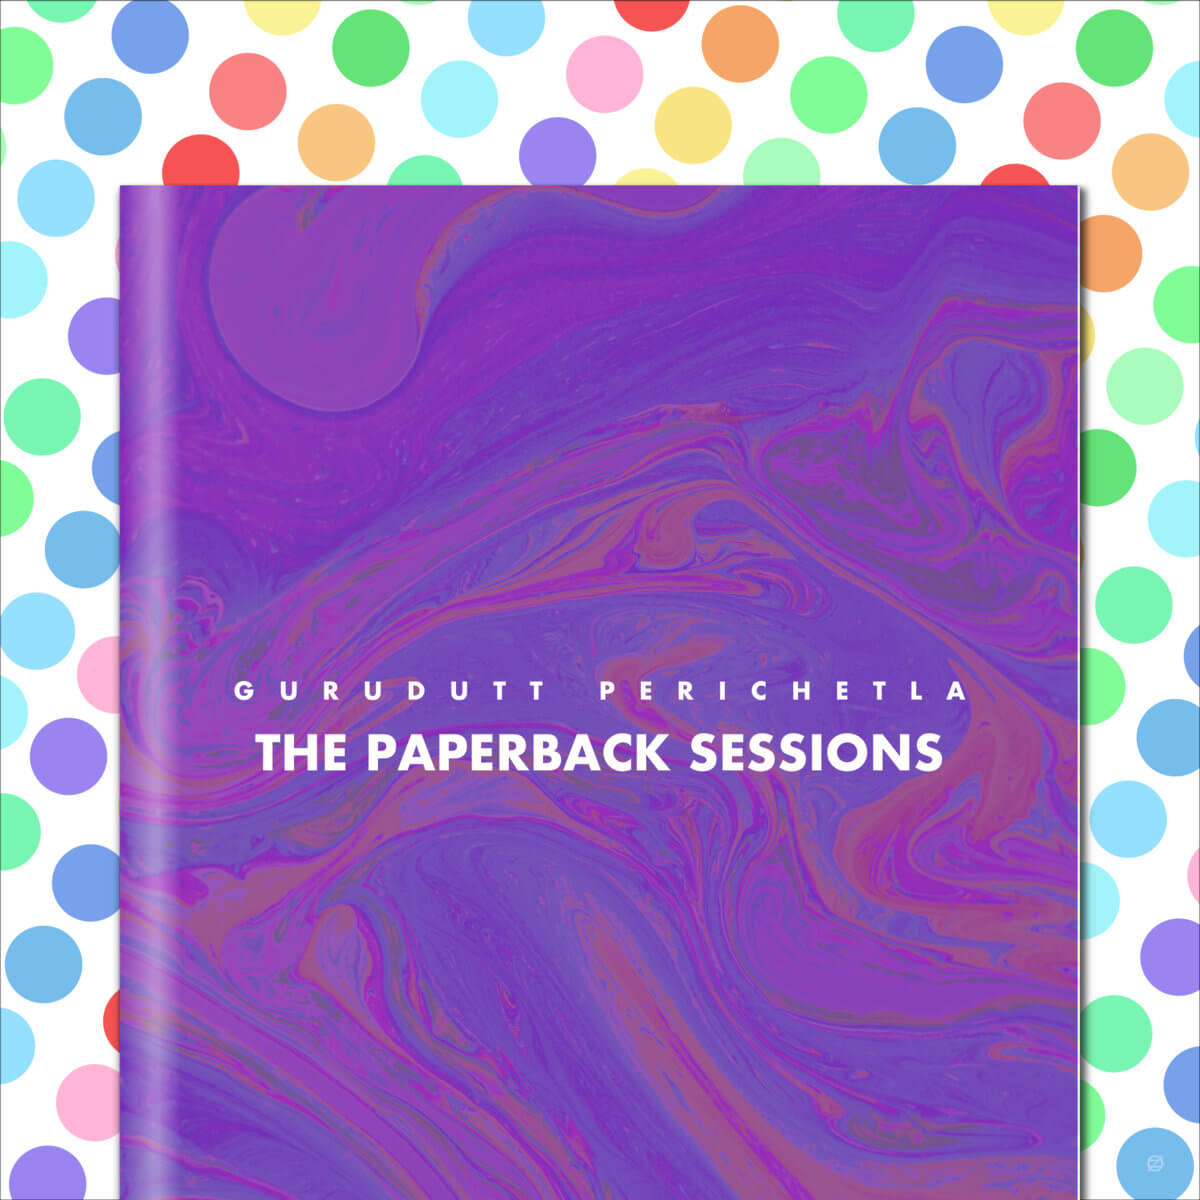 The Paperback Sessions